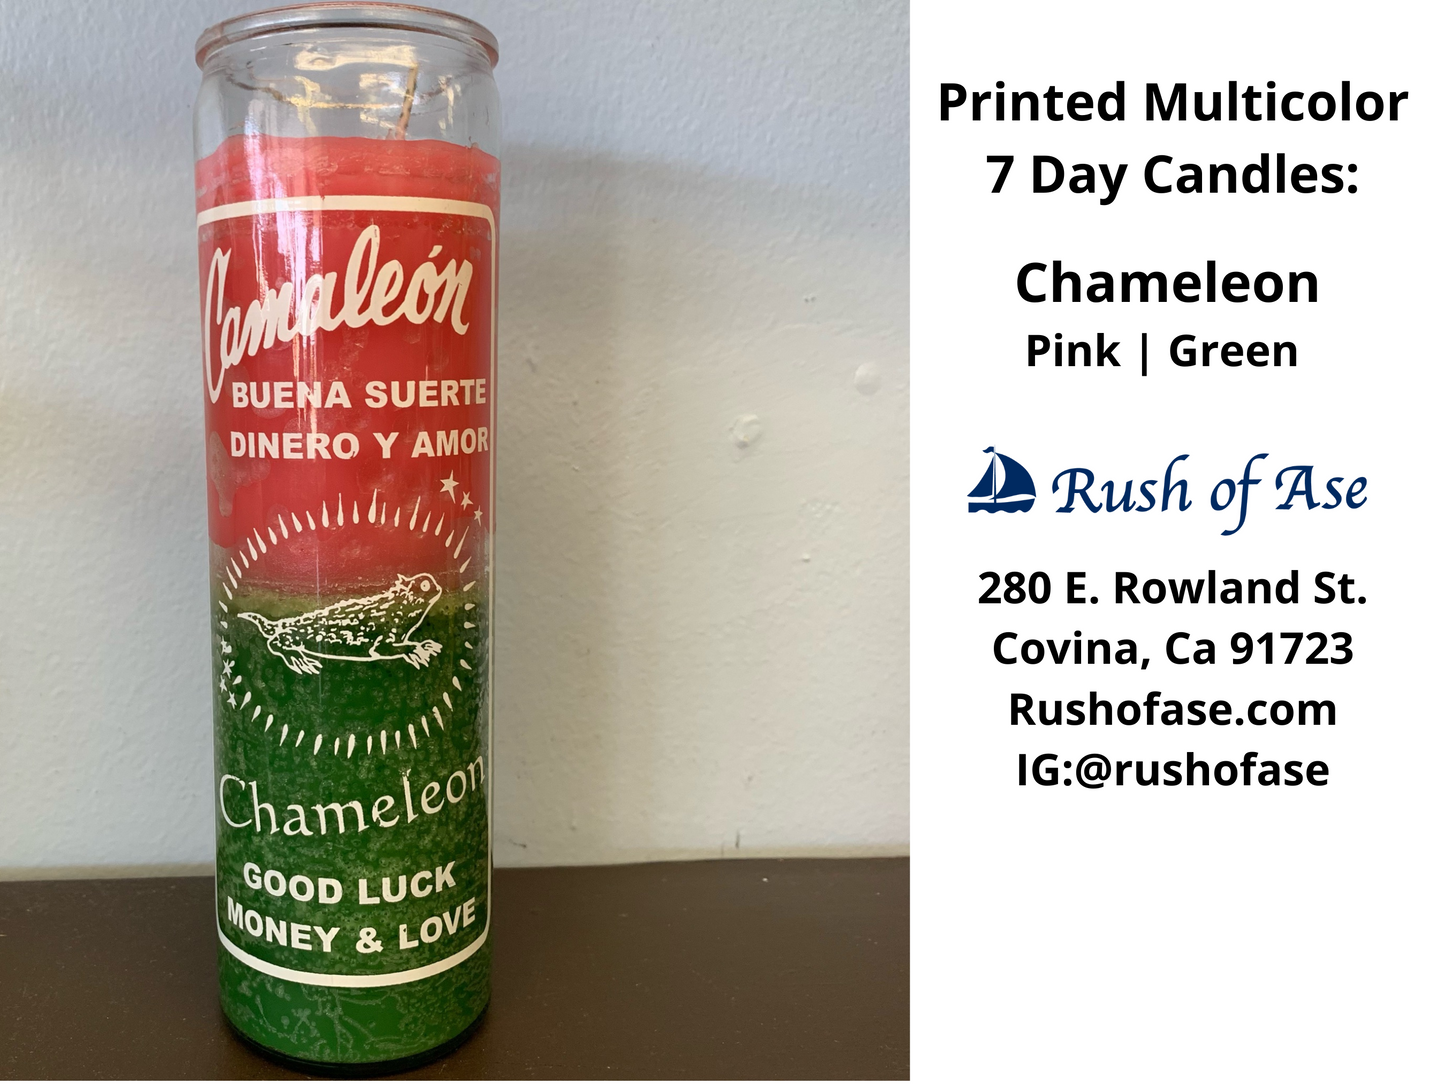 Candles | 7 Day Candles |  Printed Multi-color 7 Day Candle [FREE SHIPPING USA]